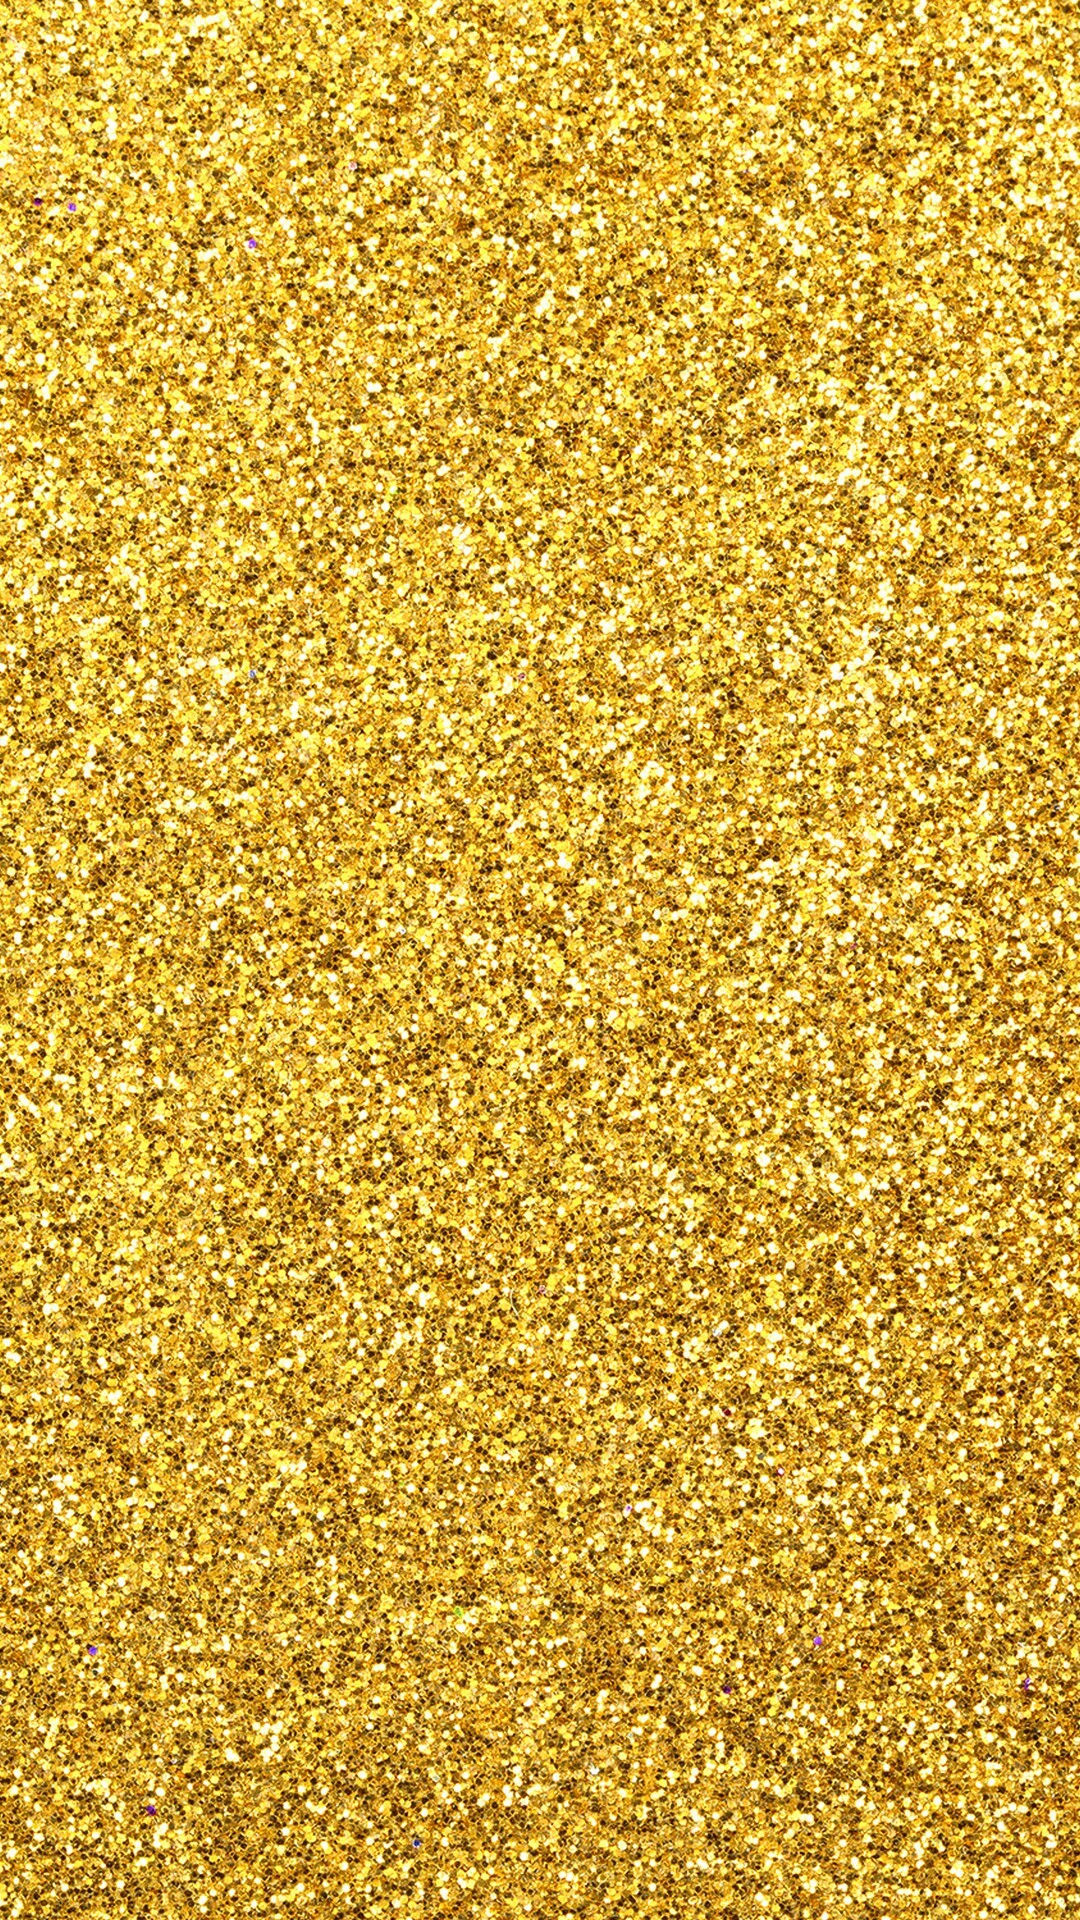 Gold Glitter: Golden particles, The powder used by decorators and painters. 1080x1920 Full HD Background.